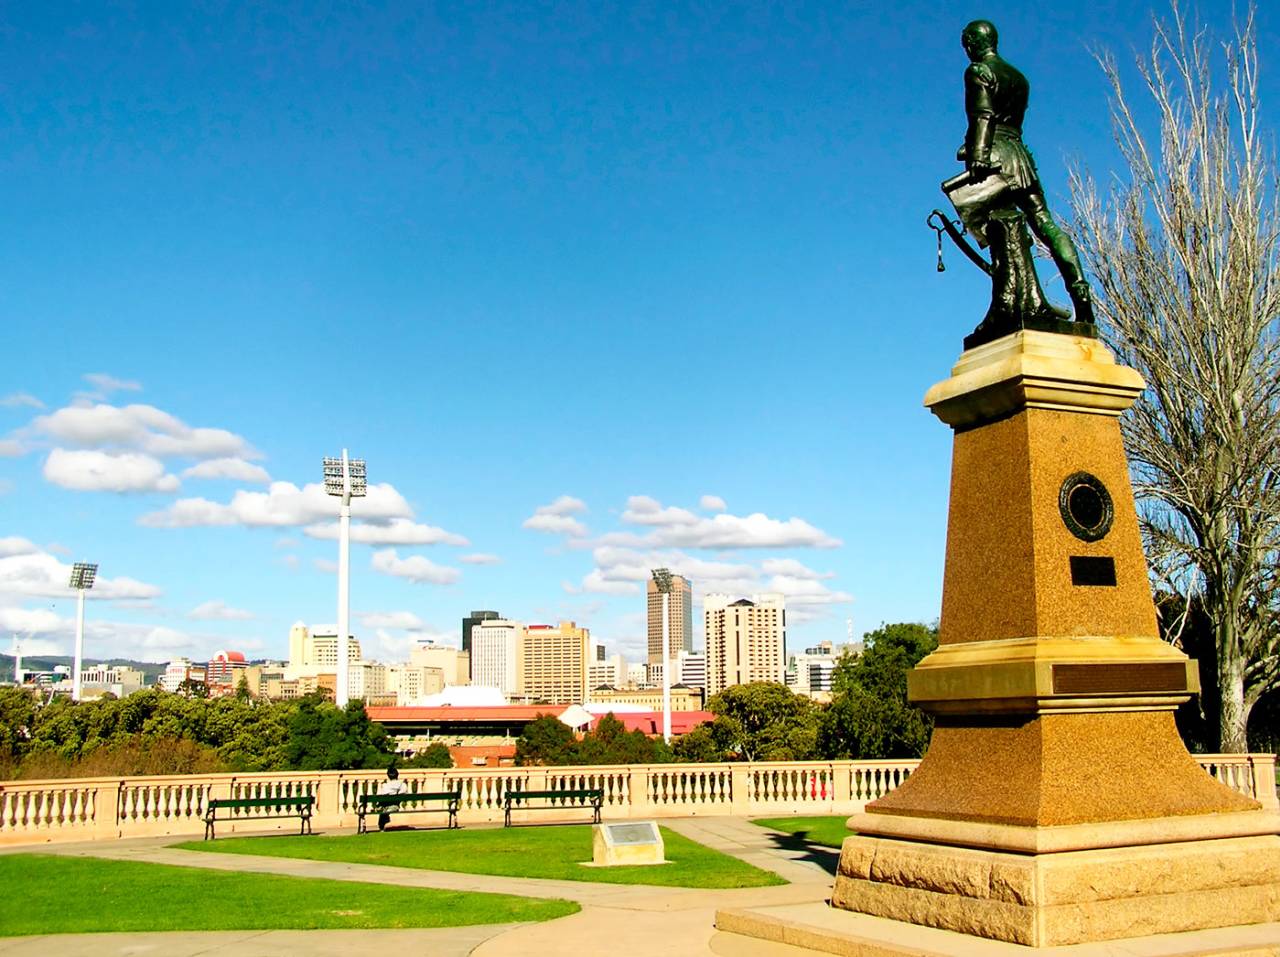 The statue of Colonel Light in Light's Vision on Montefiore Hill overlooks the Adelaide Oval&nbsp;&nbsp;&bull;&nbsp;&nbsp;Getty Images